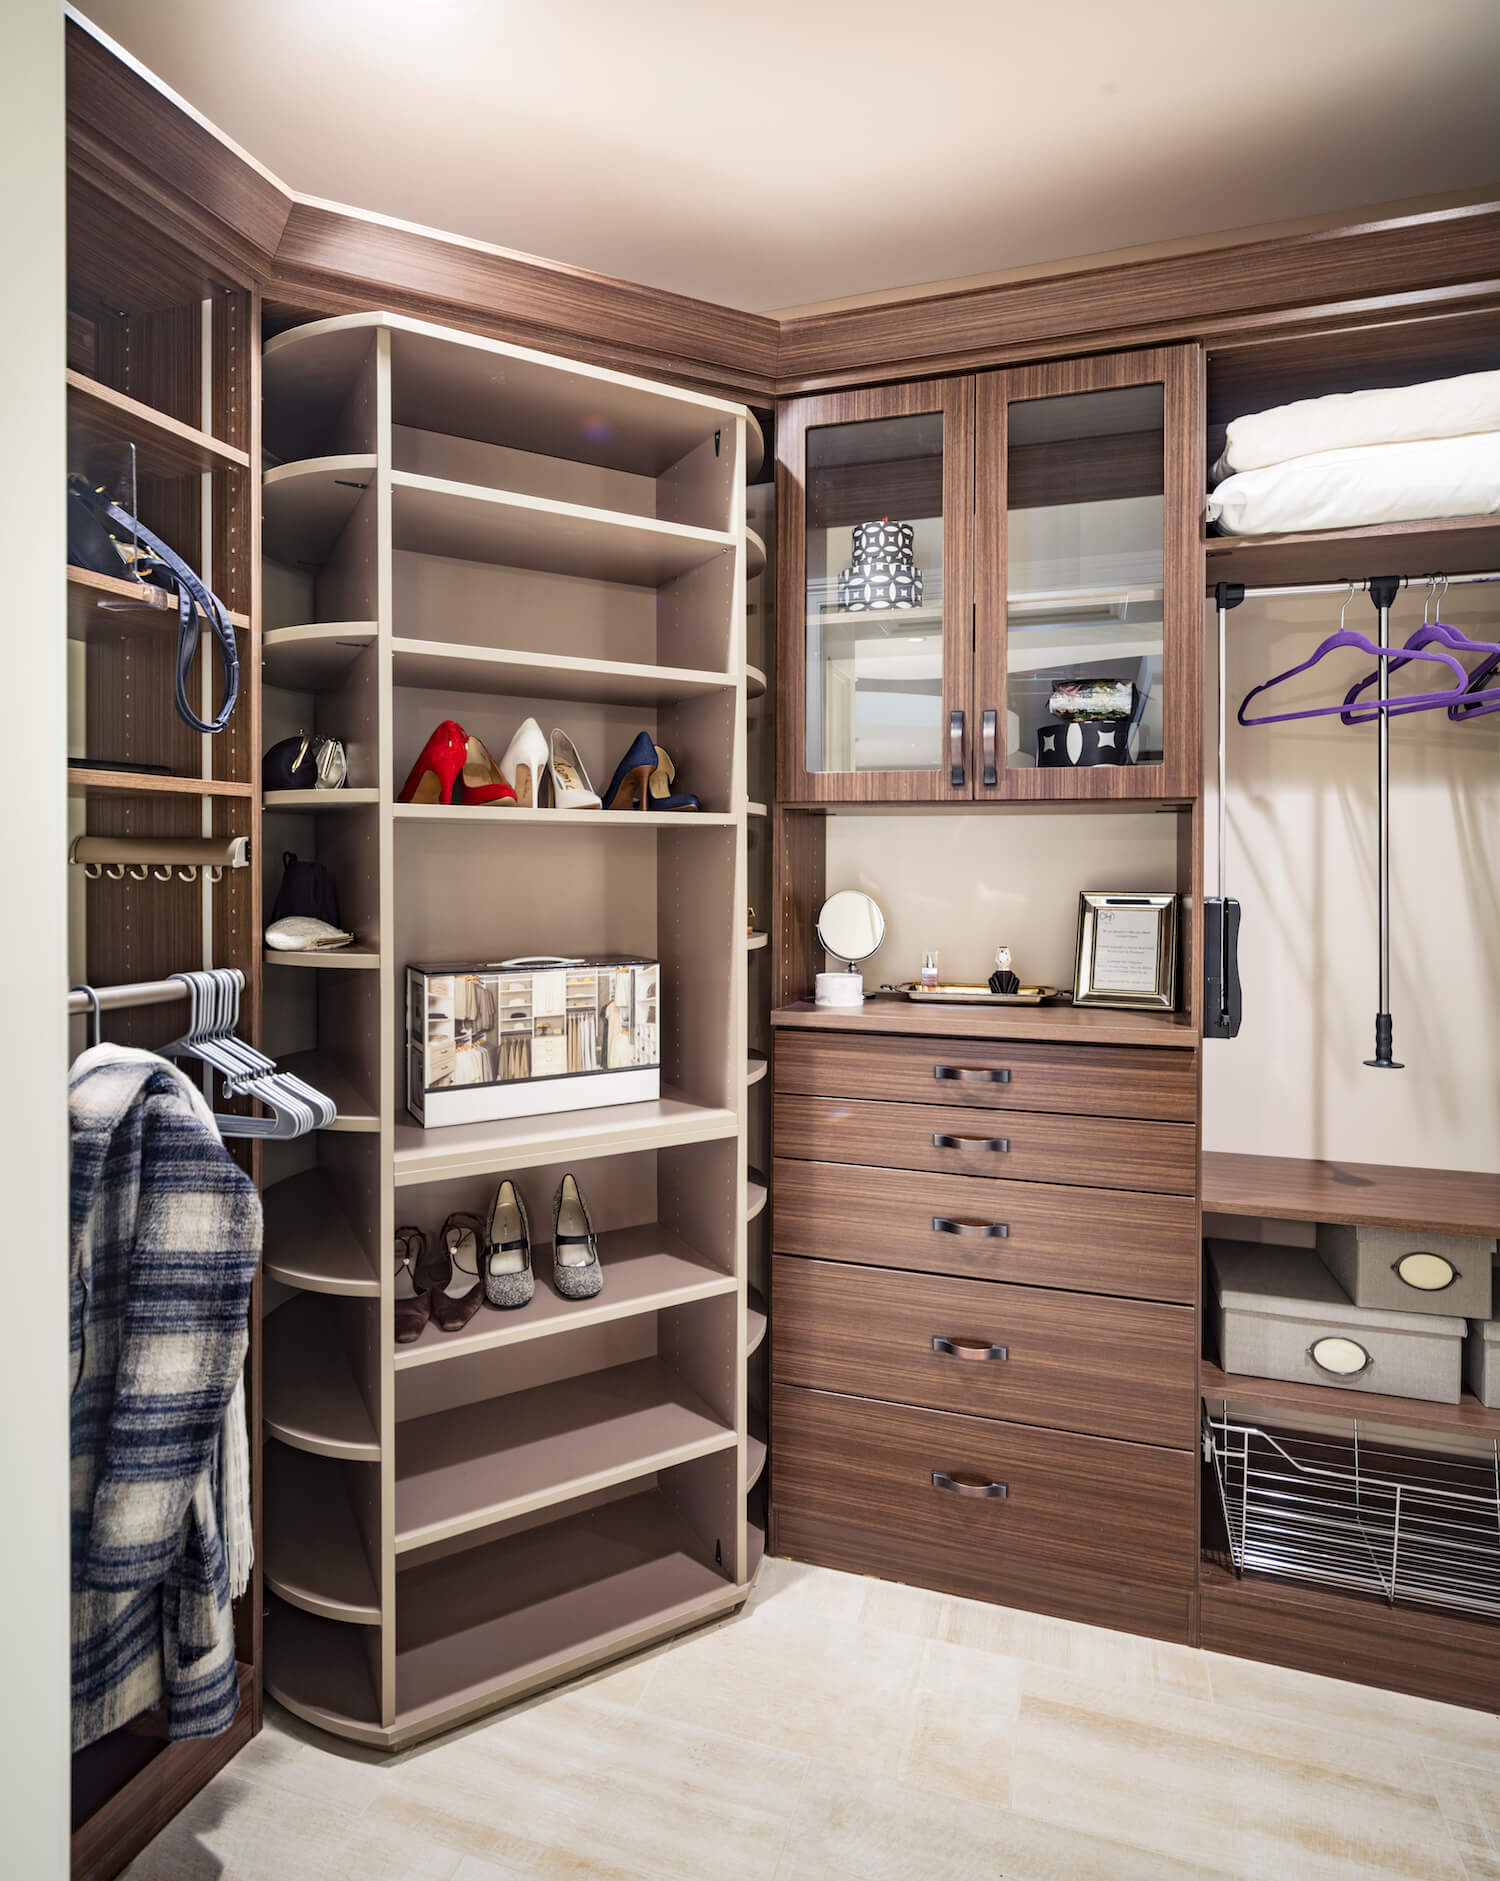 Remodeling-IndivSvc-Closets-Image1